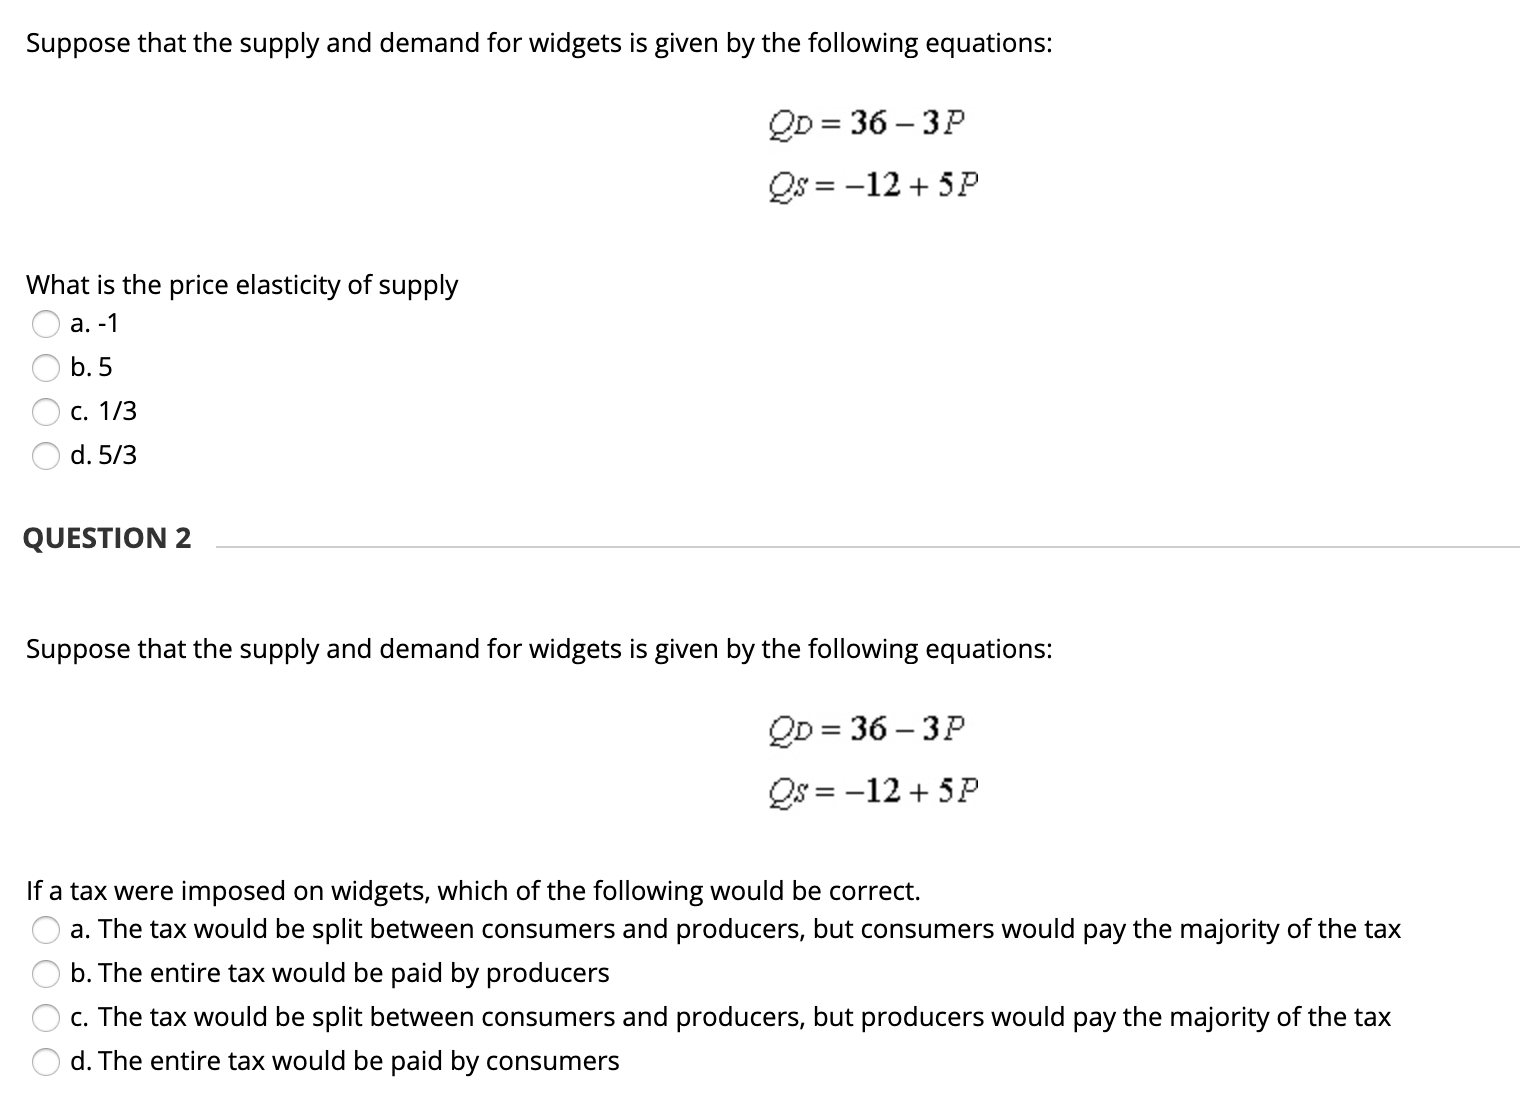 Suppose that the supply and demand for widgets is given by the following equations:
QD = 36 – 3P
= -12 + 5P
What is the price elasticity of supply
O a. -1
b. 5
C. 1/3
d. 5/3
QUESTION 2
Suppose that the supply and demand for widgets is given by the following equations:
QD = 36 – 3P
Qs = -12 + 5P
If a tax were imposed on widgets, which of the following would be correct.
a. The tax would be split between consumers and producers, but consumers would pay the majority of the tax
b. The entire tax would be paid by producers
c. The tax would be split between consumers and producers, but producers would pay the majority of the tax
d. The entire tax would be paid by consumers
